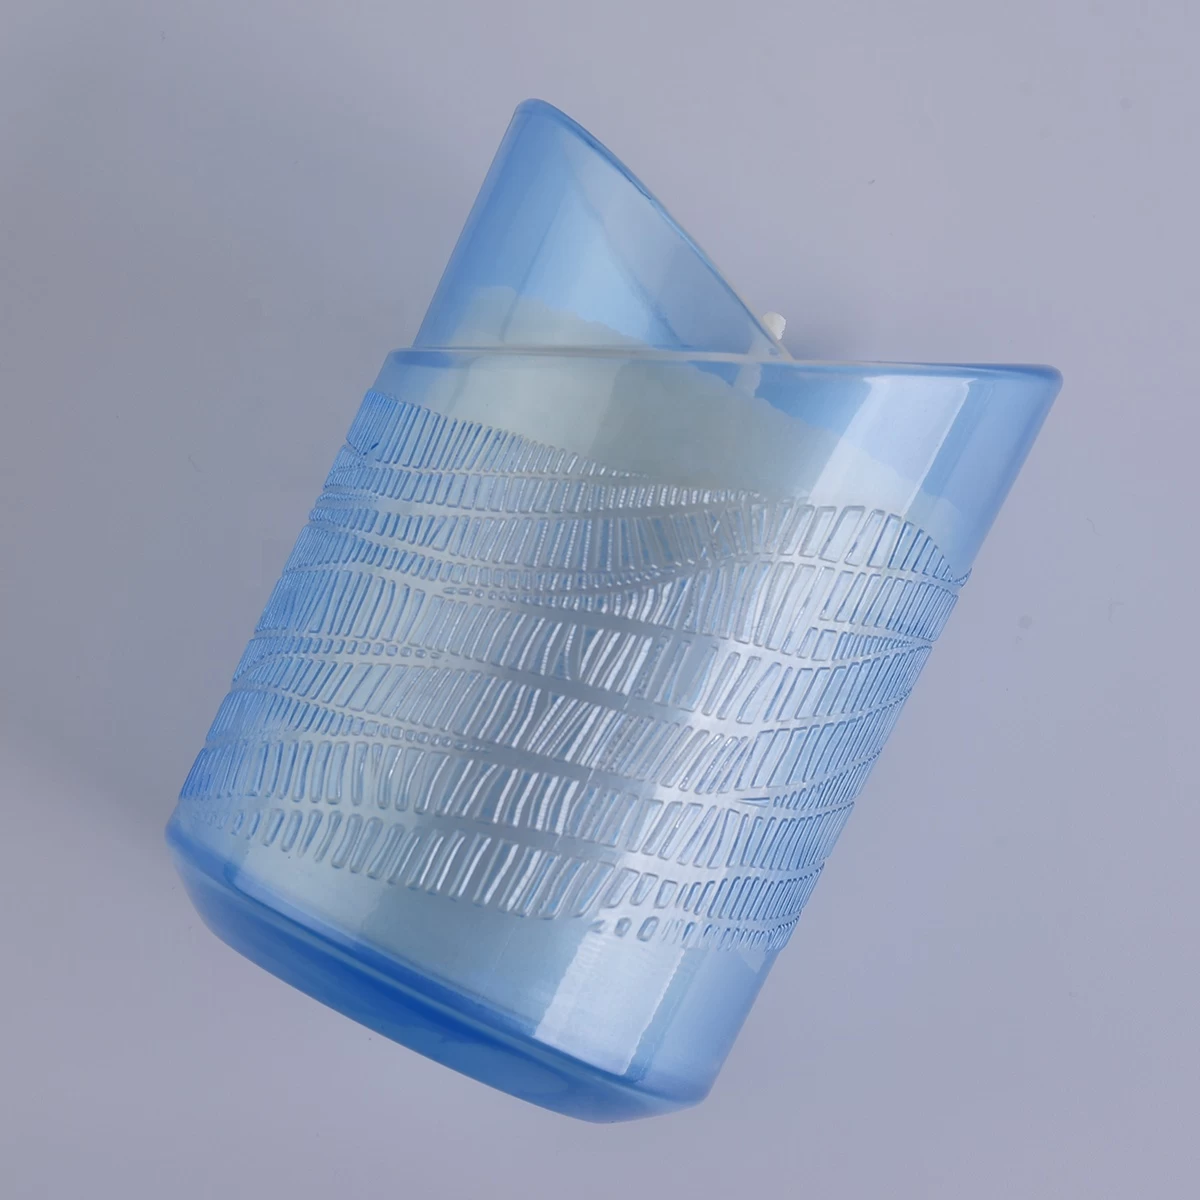 glossy blue glass candle holder, translucent candle holder wedding centerpieces